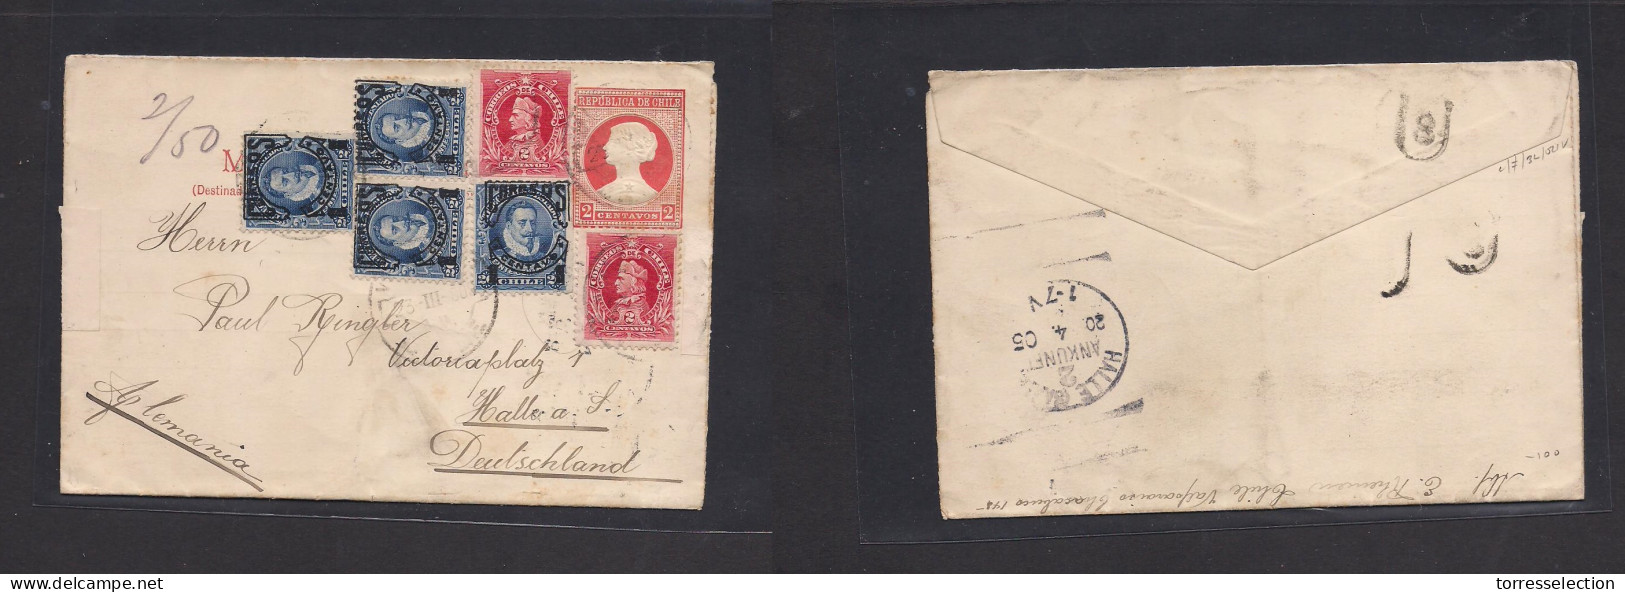 CHILE - Stationery. 1905. Valparaiso - Germany, Halle (20 April) 2c Red Stat Lettersheet + 5 Adtls Tied Cds. Fine Franki - Chile